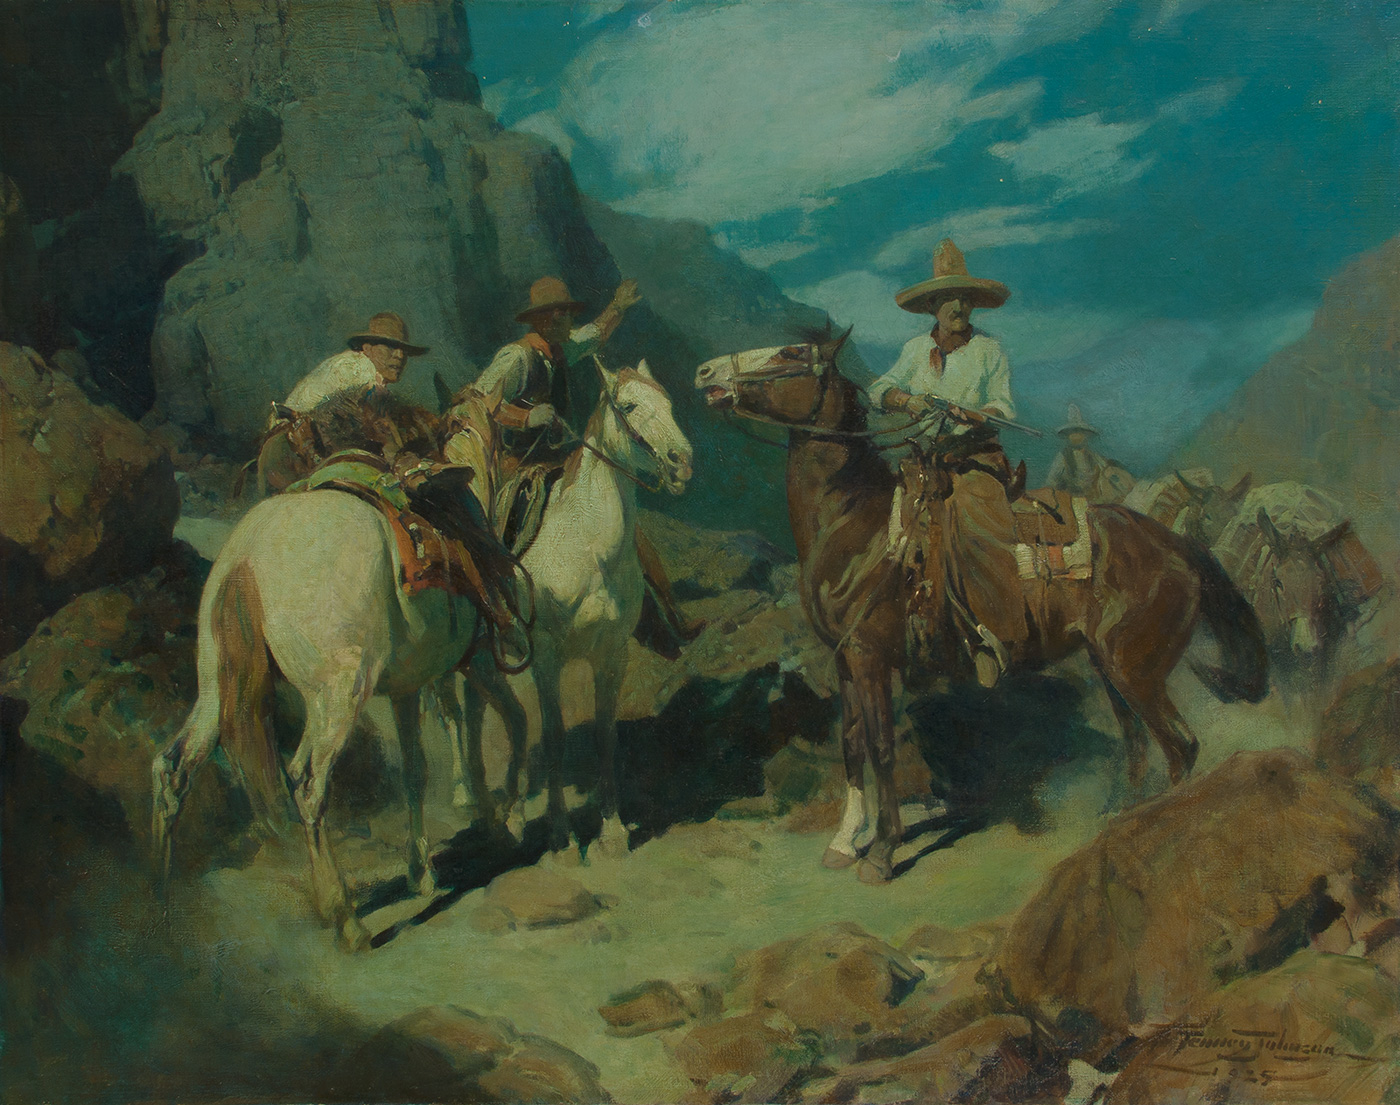 Three men on horseback stop while others follow behind on a mountainous path at night.